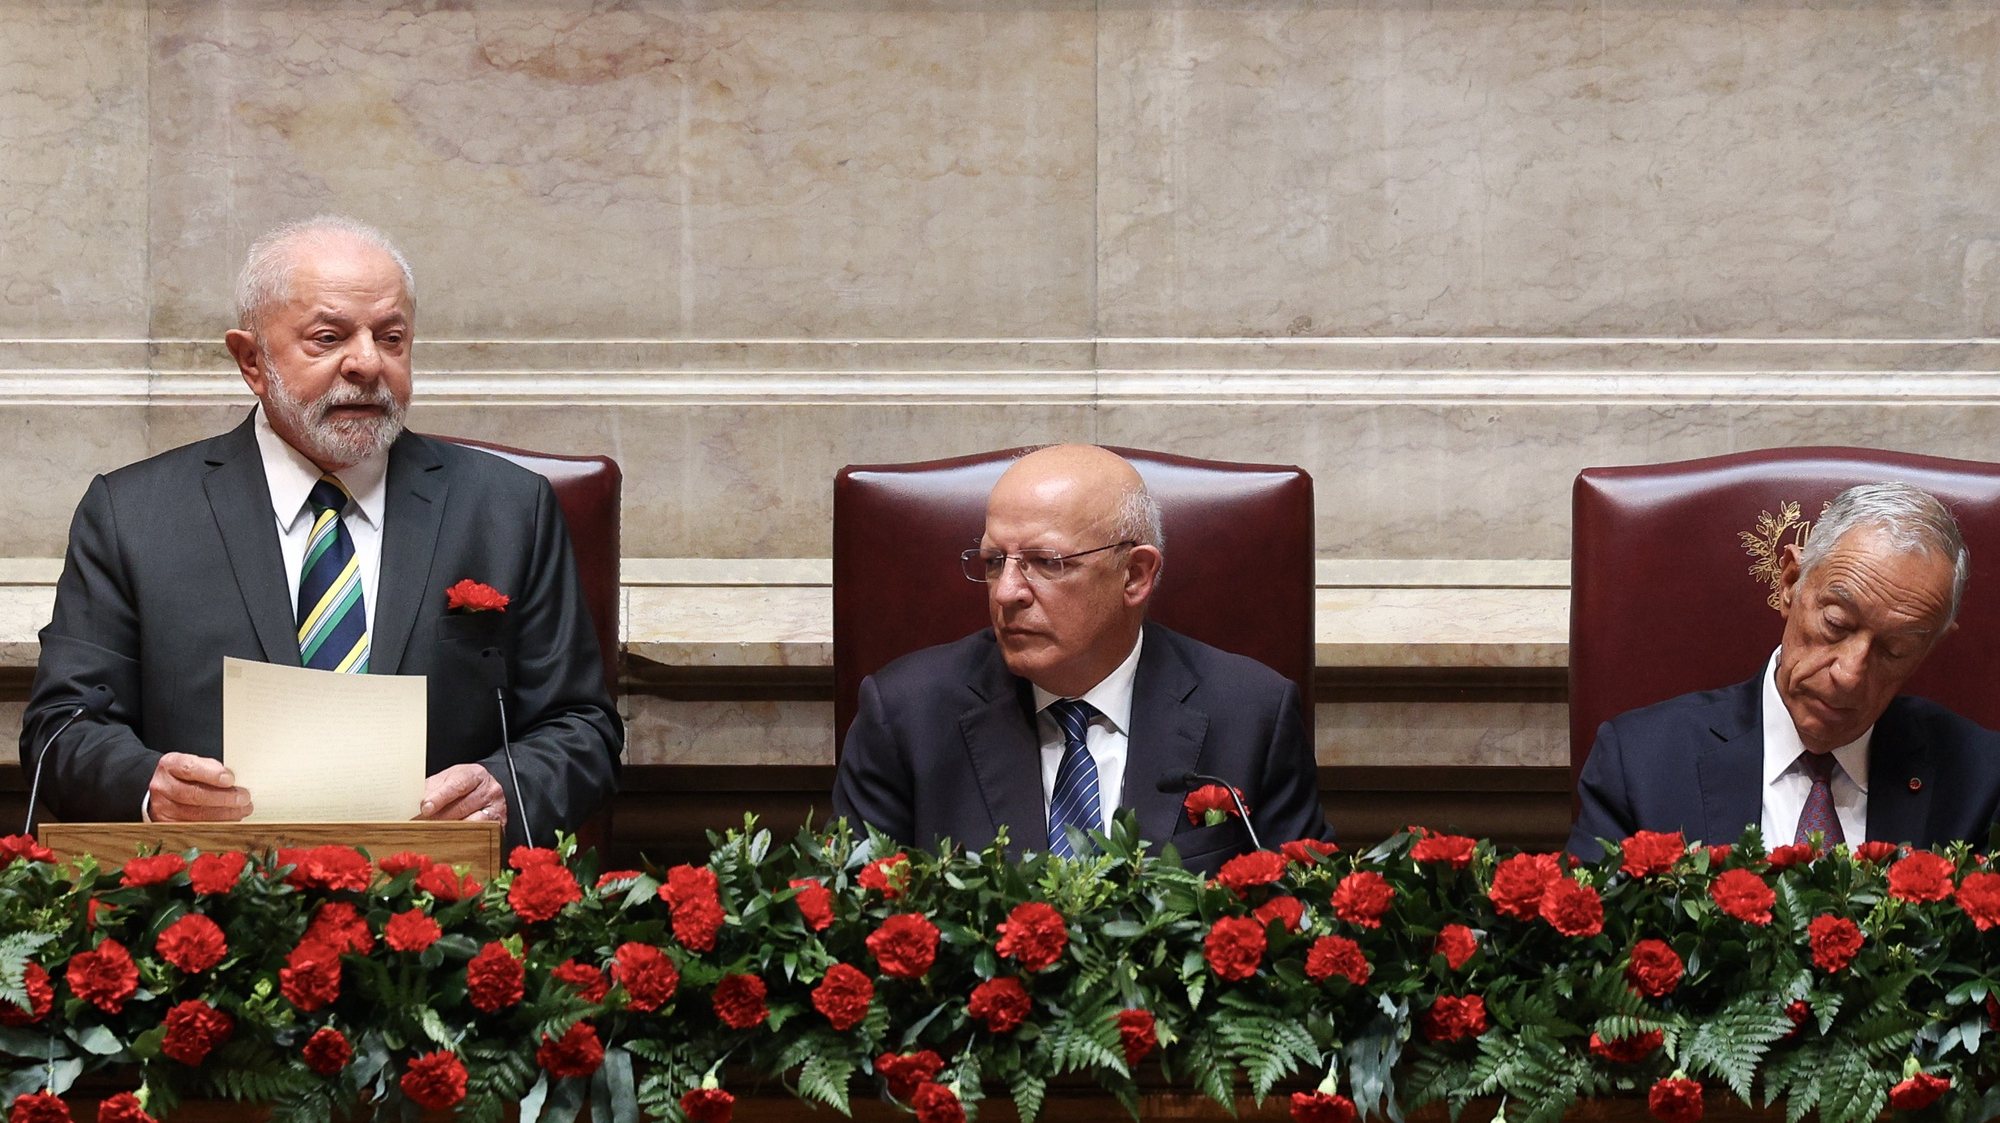 The President of the Federative Republic of Brazil, Lula da Silva, flanked by his Portuguse counterpart, Marcelo Rebelo de Sousa (R), and  the president of the Portuguese Parliament, Augusto Santos Silva (C), delivering his speech during the solemn session of welcome at the Portuguese parliament in Lisbon, Portugal, 25th april 2023. TIAGO PETINGA/LUSA